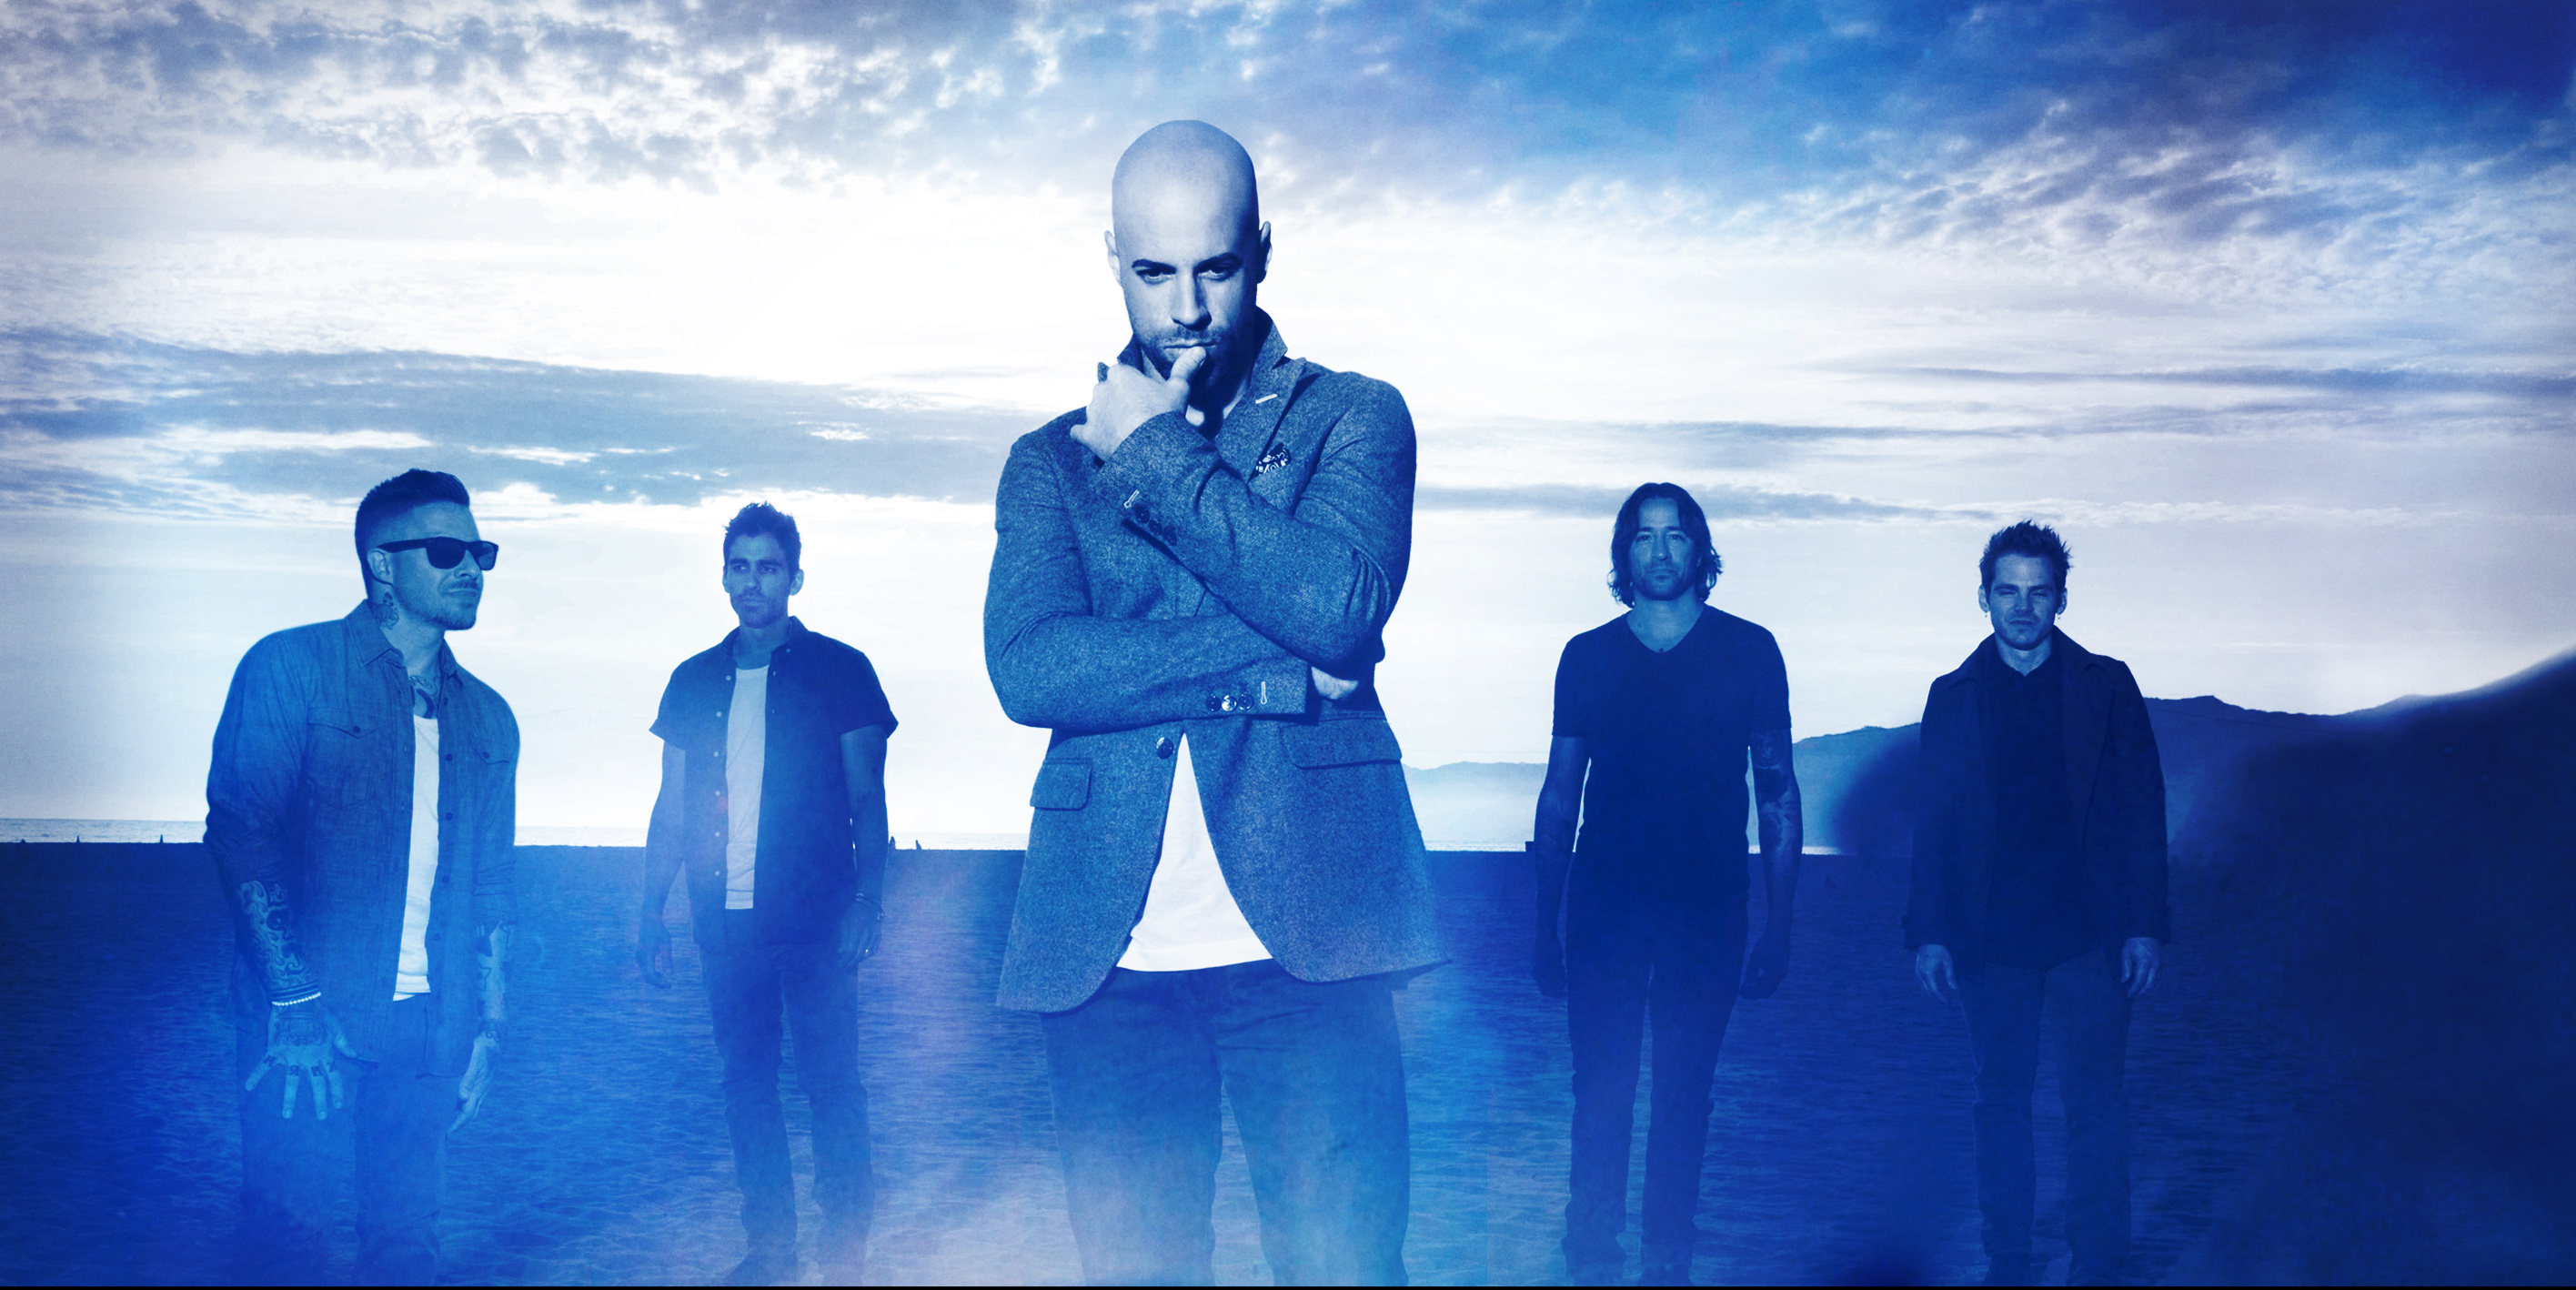 Daughtry returning to South Africa!